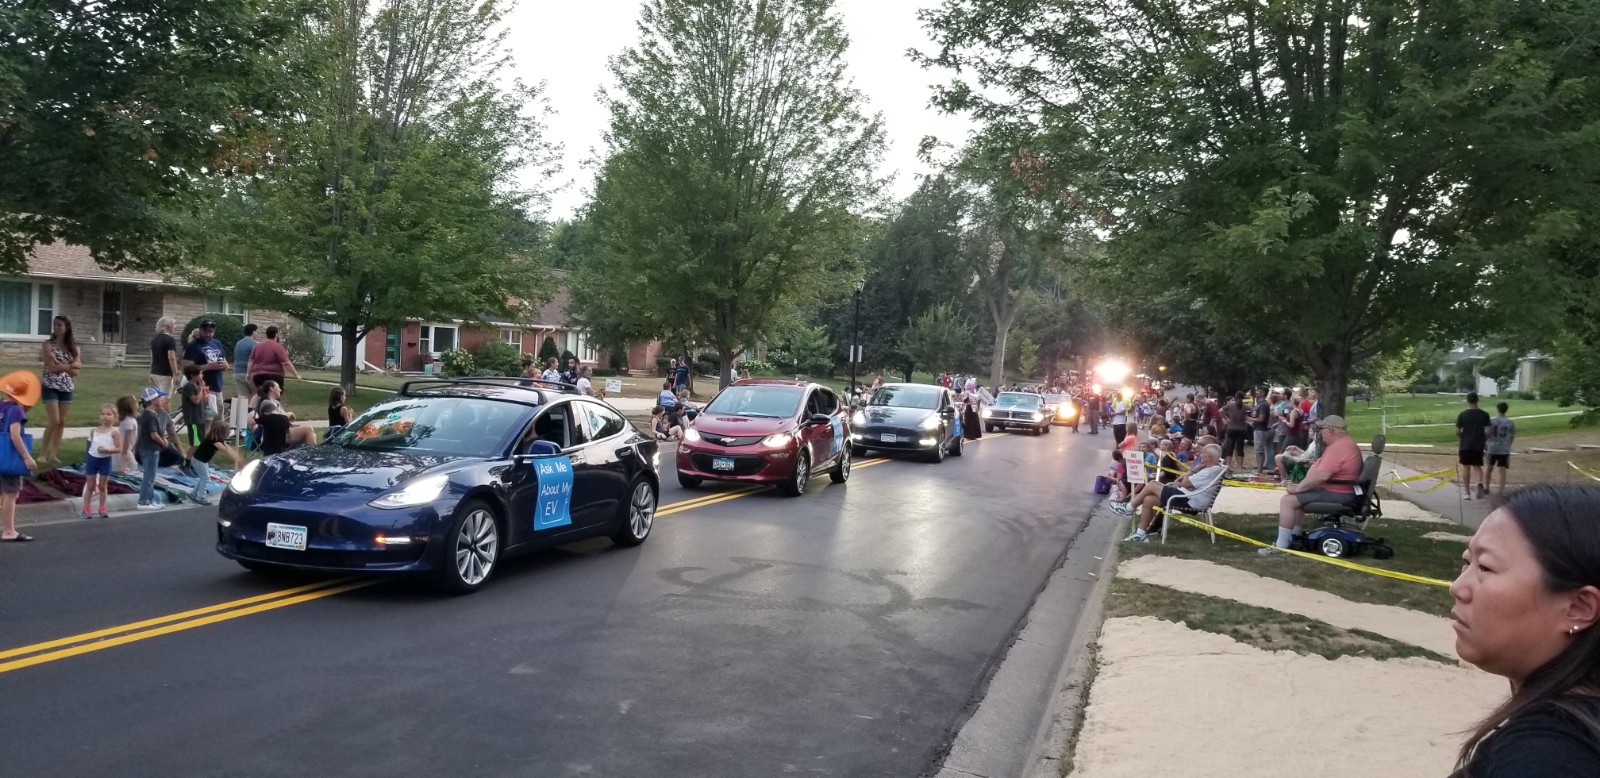 CFS members driving electric cars in the 2021 VillageFest parade